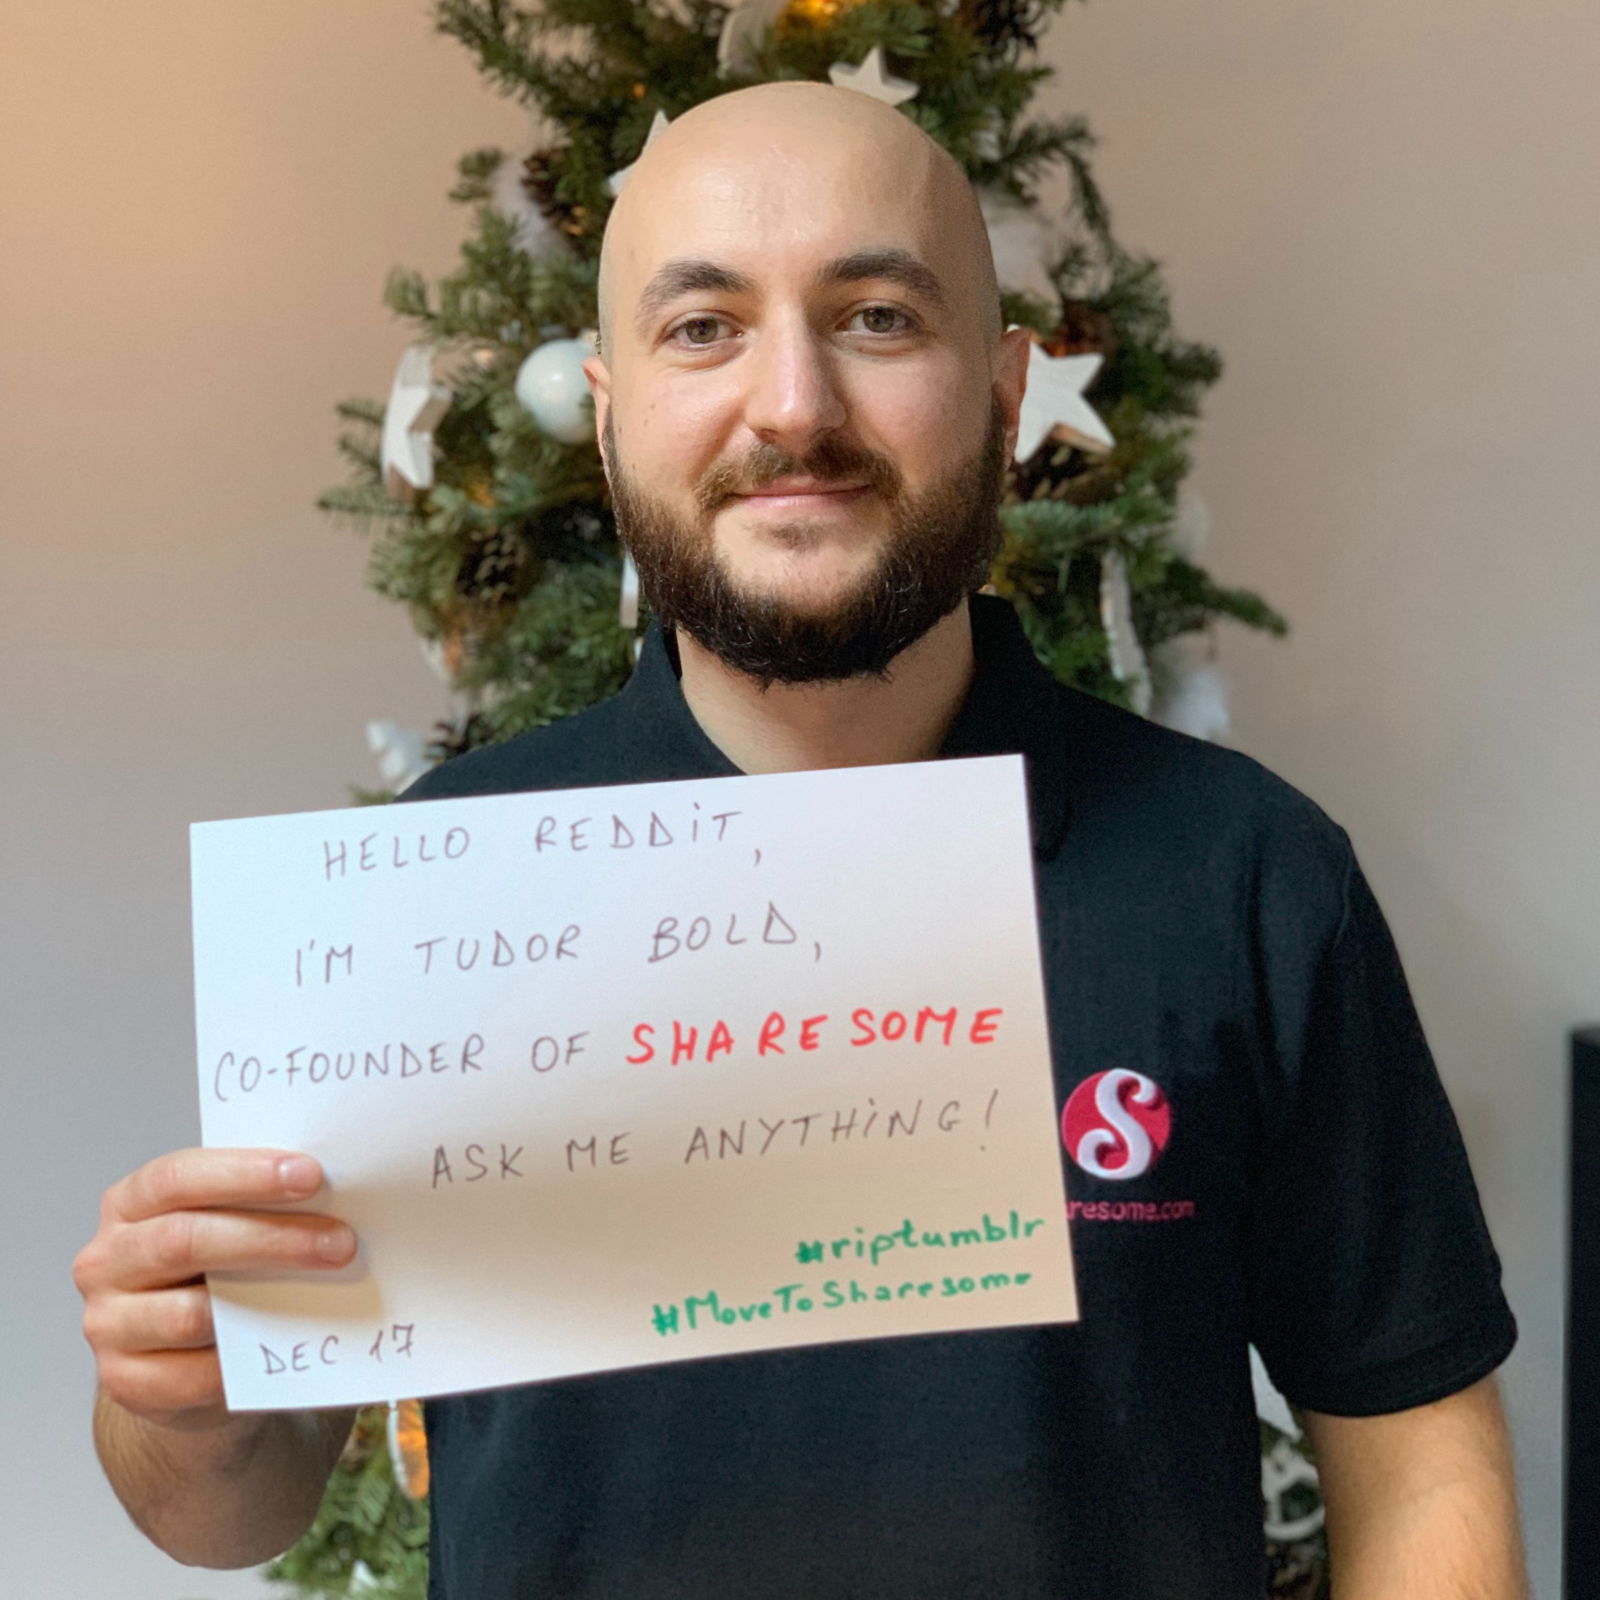 Photo by Tudor Bold with the username @TudorBold,  December 17, 2018 at 2:59 PM and the text says 'I will be hosting an #AMA on @Reddit today, talking about @Sharesome in the context of #TumblrPurge. 

#MoveToSharesome

Go here: https://www.reddit.com/r/IAmA/comments/a70ir2/today_tumblr_officially_banned_porn_i_made/'